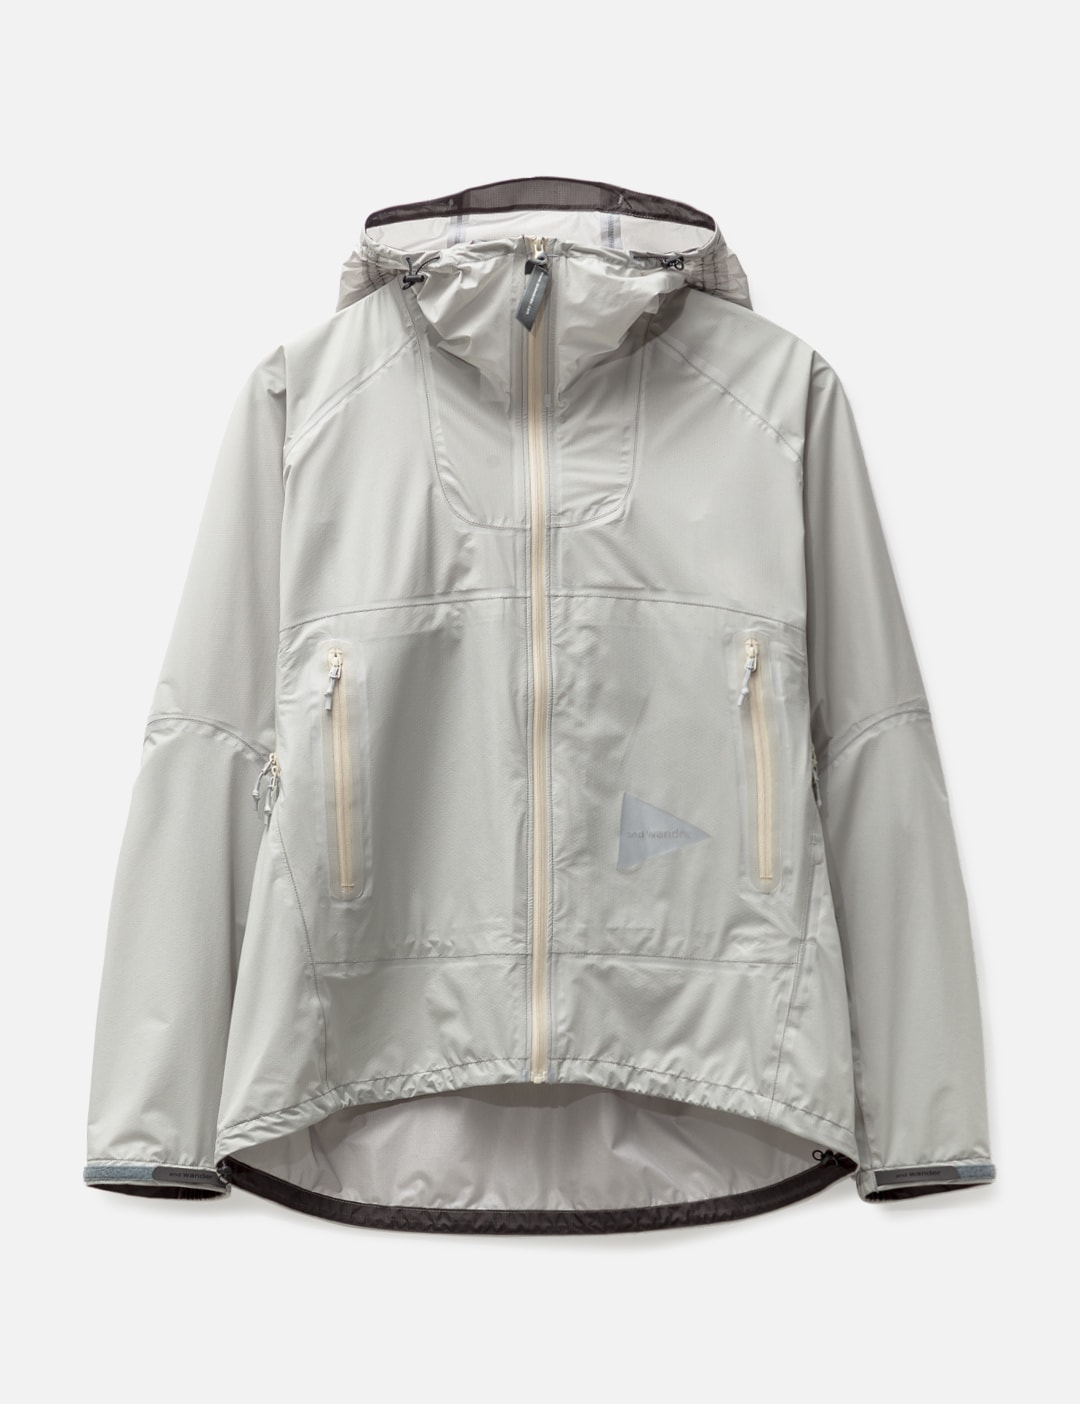 and wander - 3L UL rain jacket | HBX - Globally Curated Fashion and ...